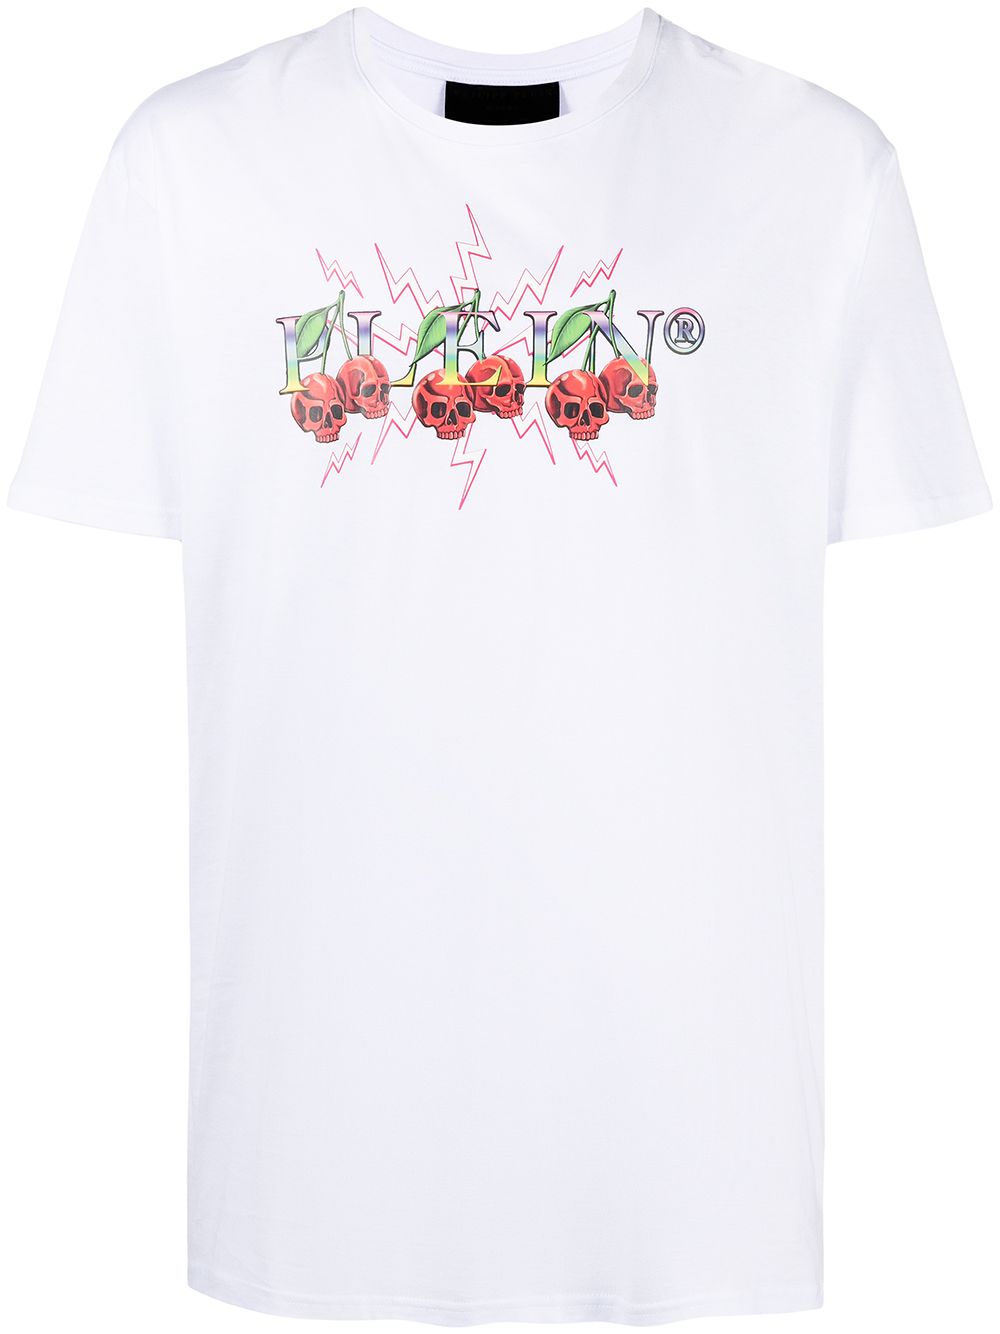 Shop Philipp Plein cherries logo-print T-shirt with Express Delivery ...